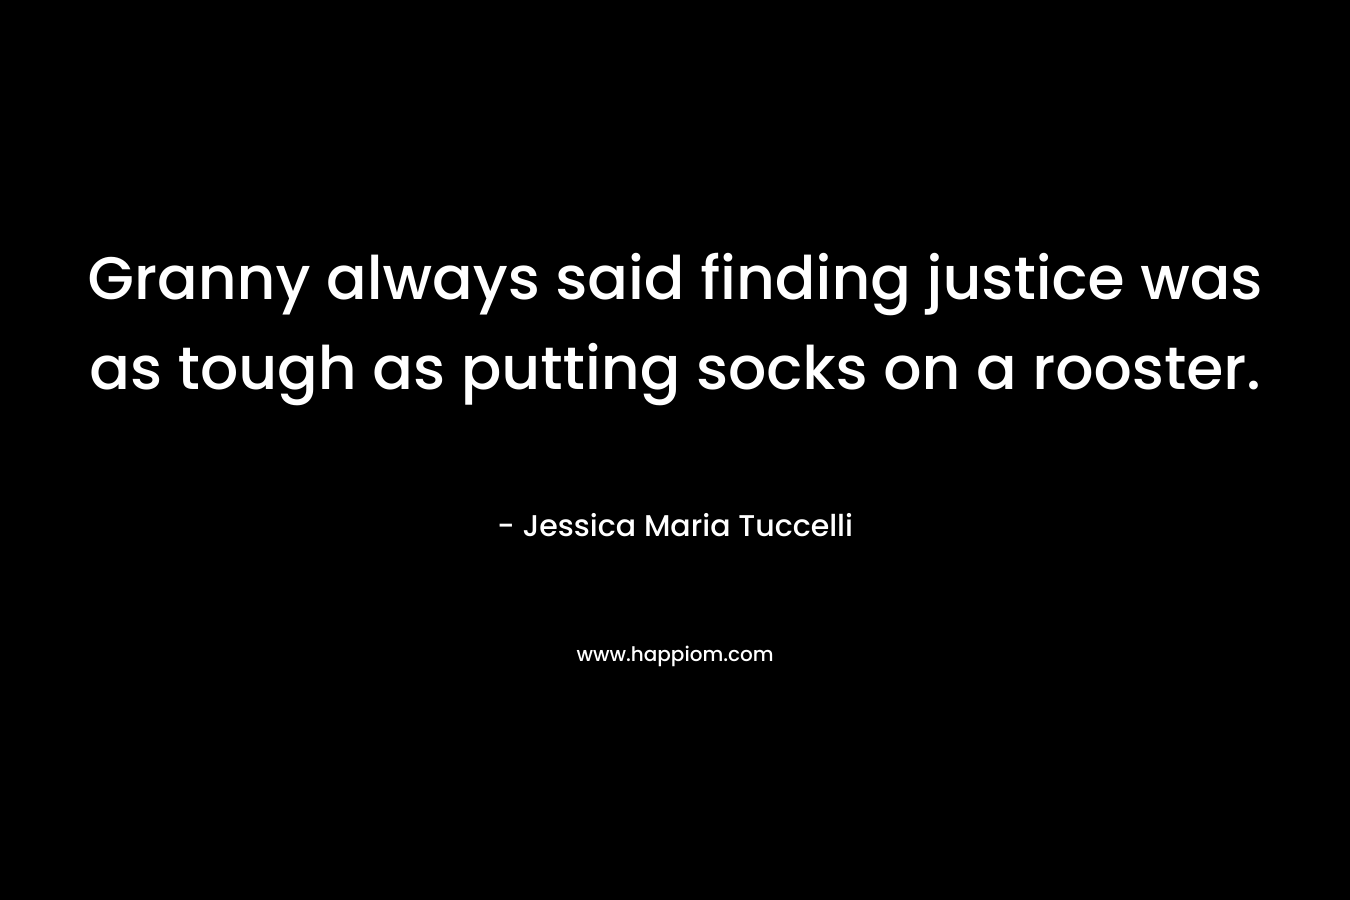 Granny always said finding justice was as tough as putting socks on a rooster. – Jessica Maria Tuccelli